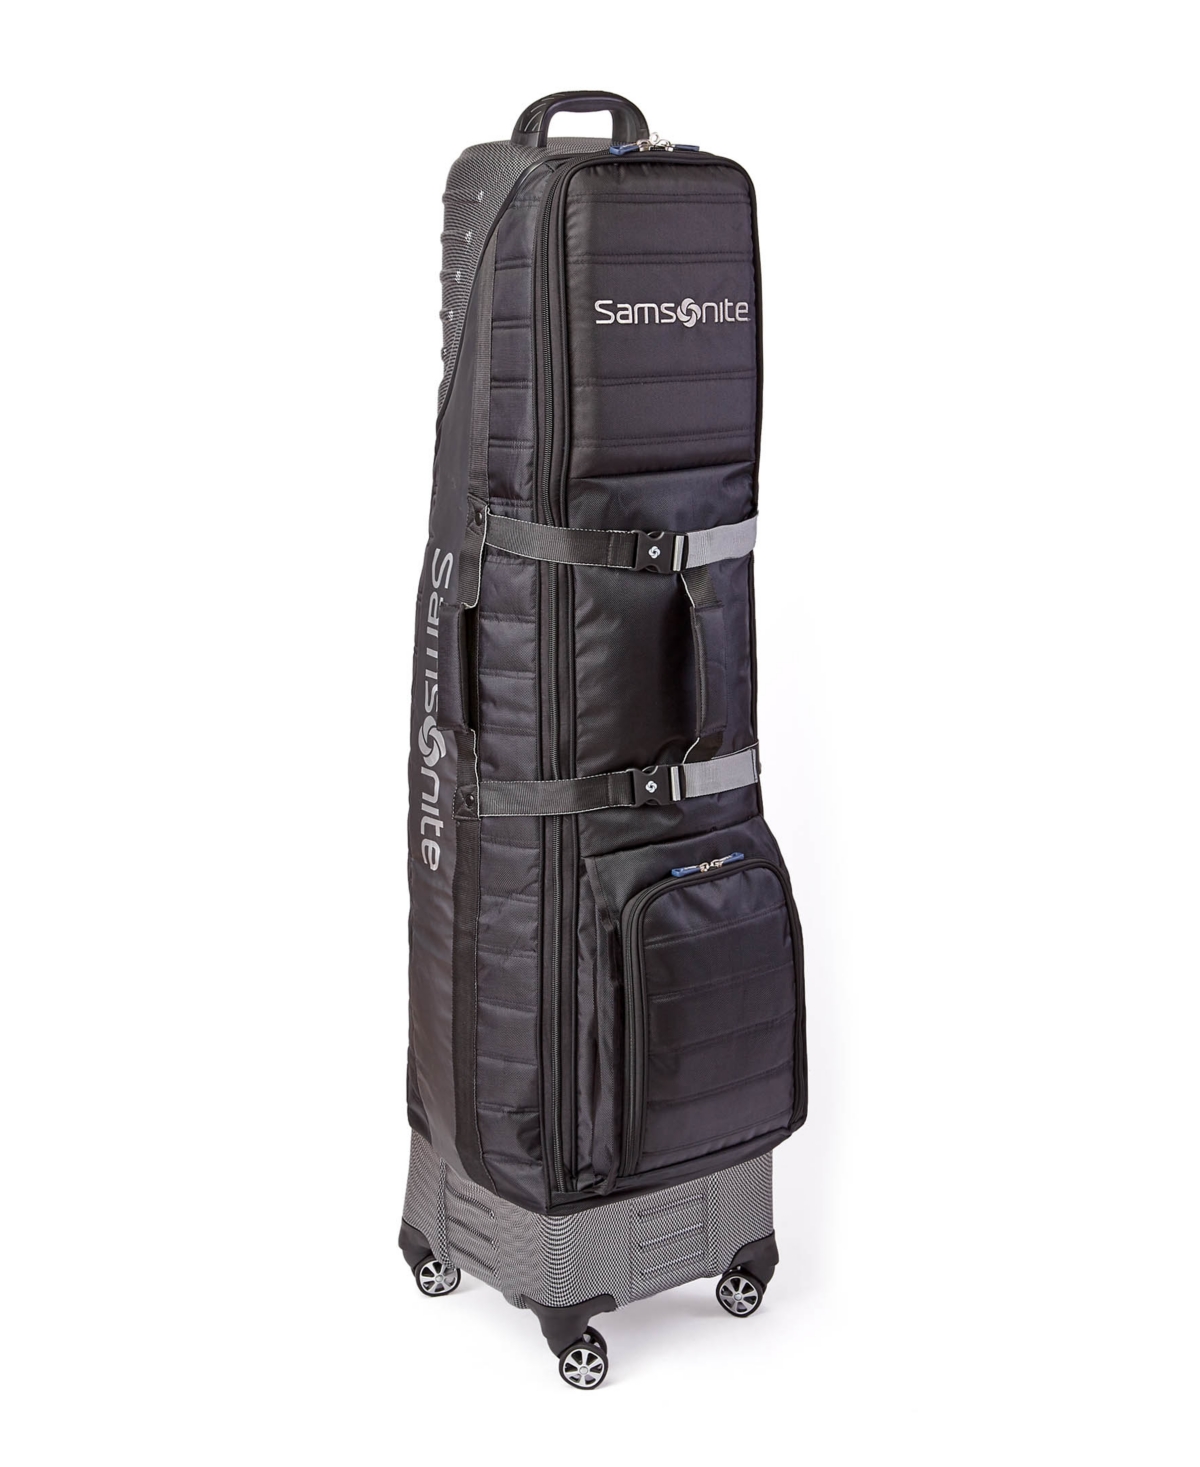 Samsonite 'the Protector' Hard And Soft Sided Golf Travel Cover In Black